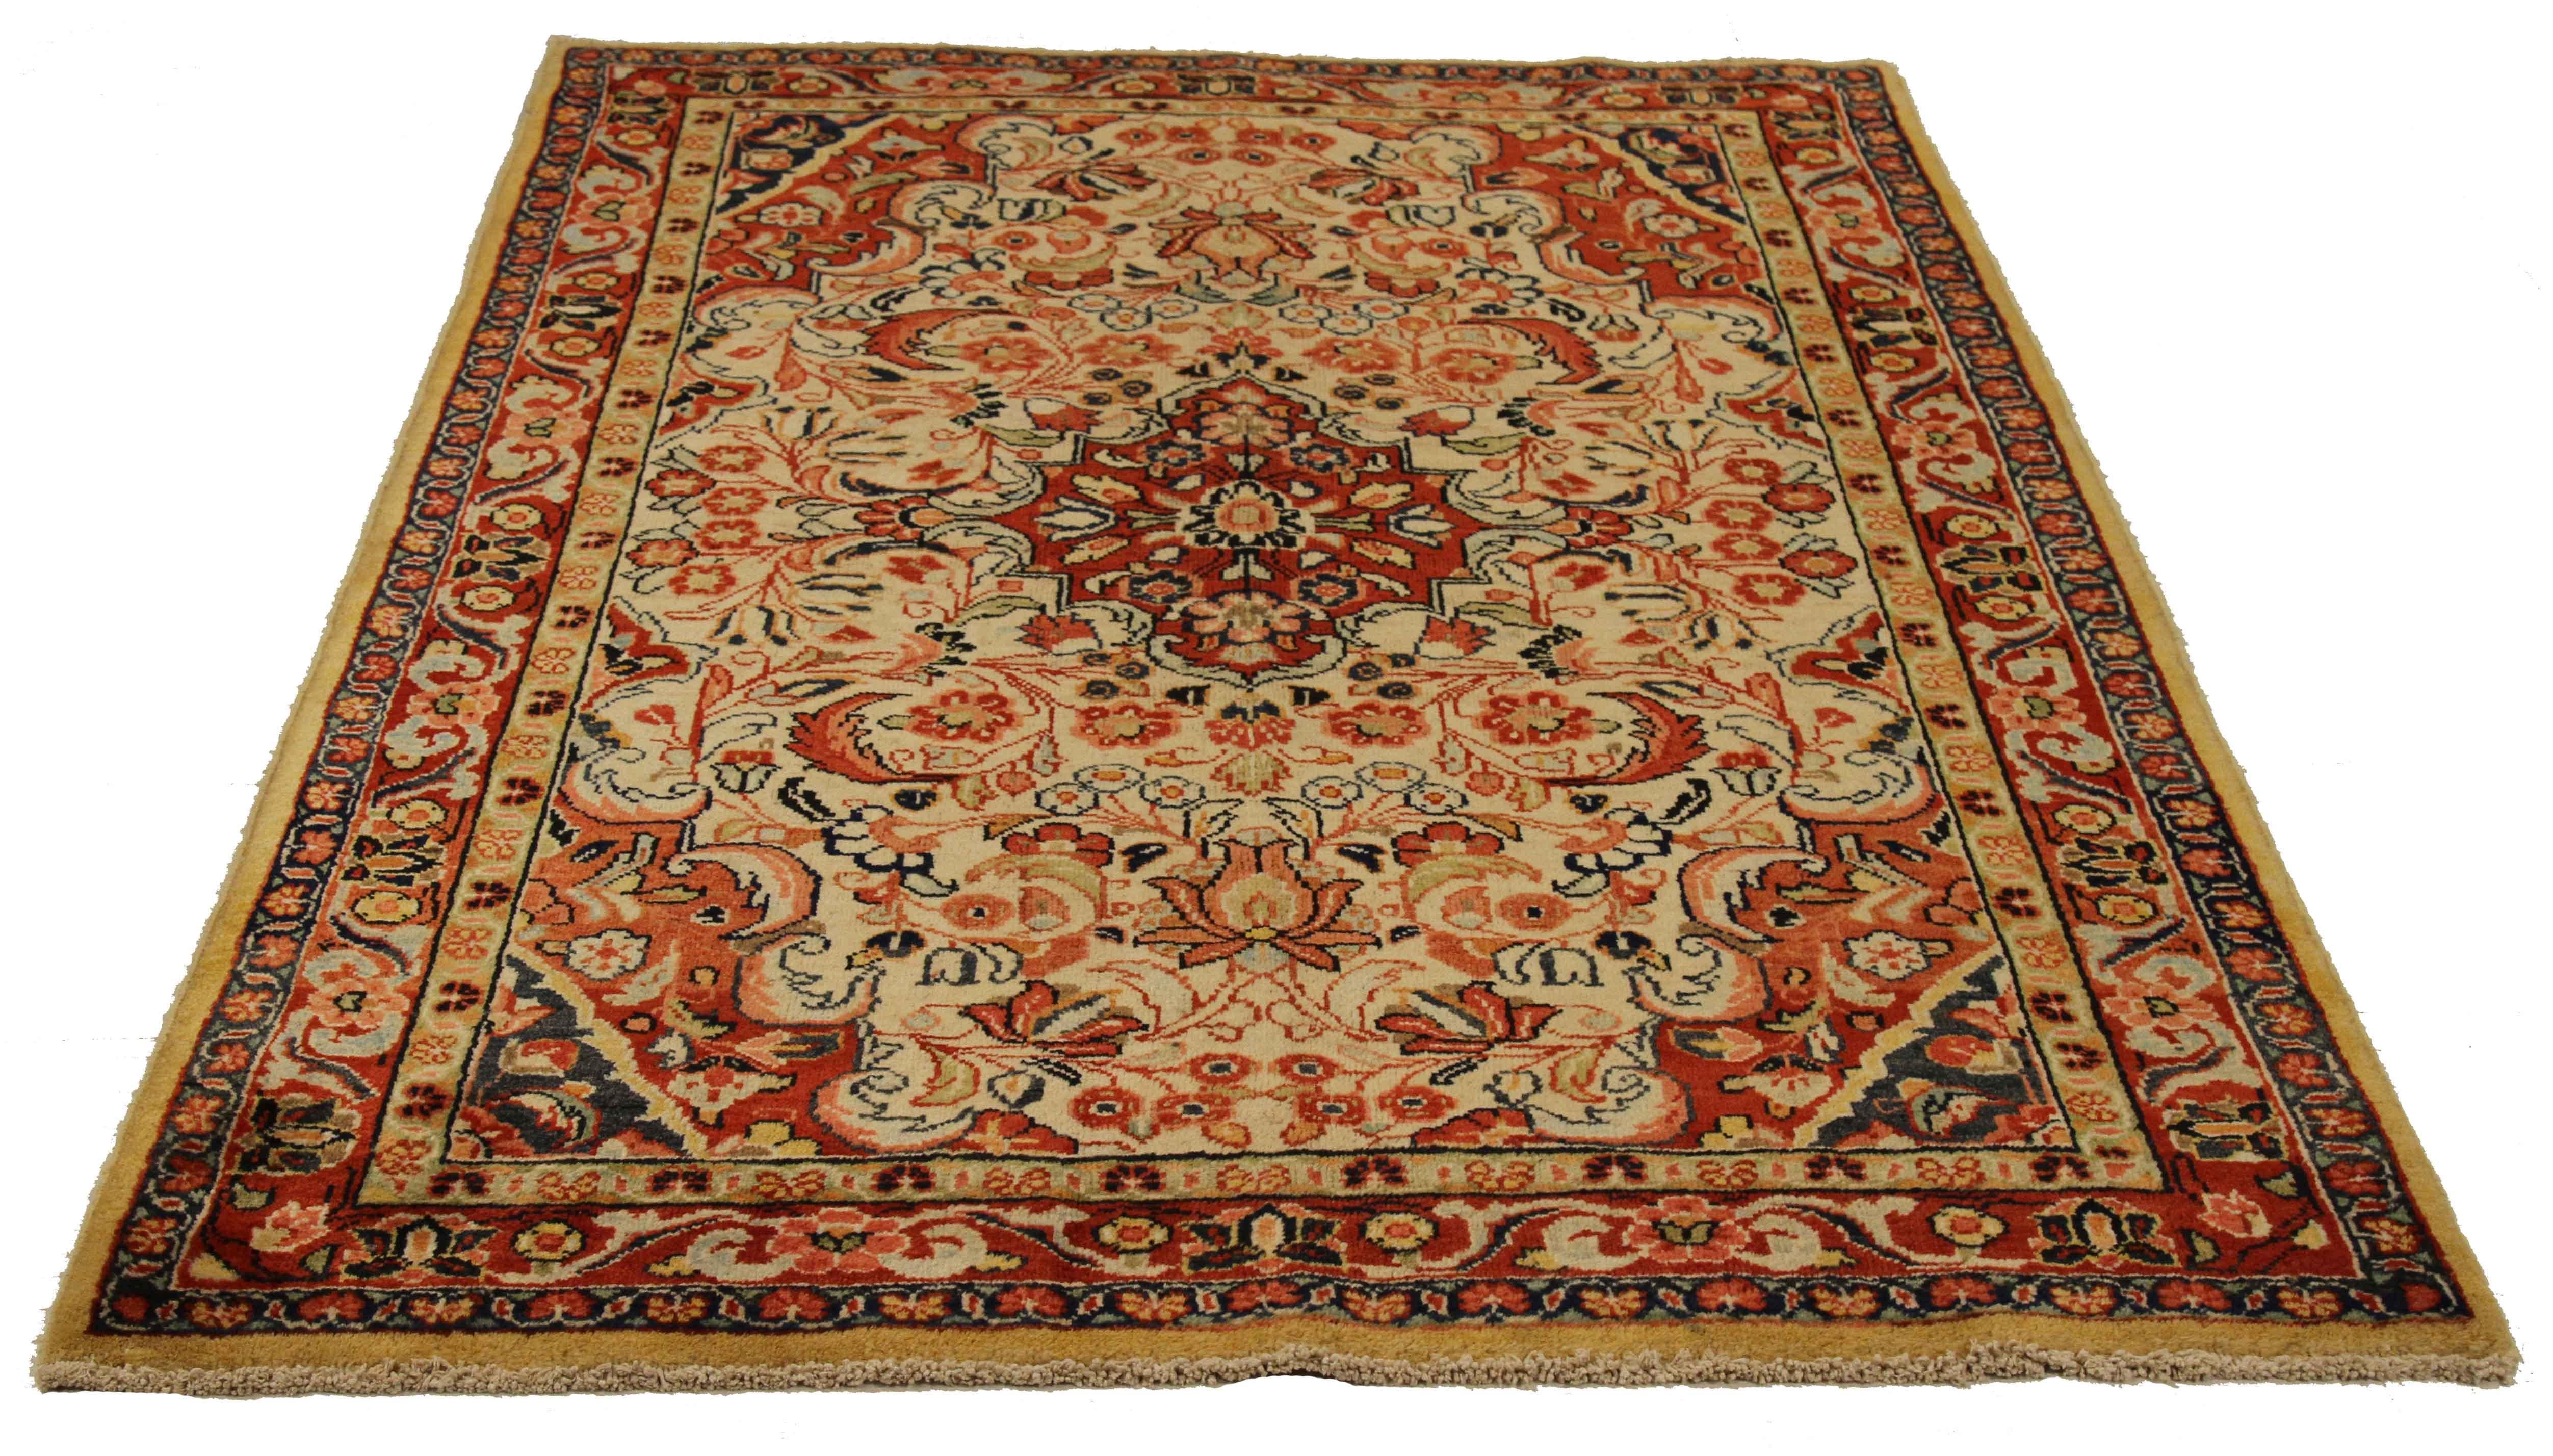 Antique Persian rug handwoven from the finest sheep’s wool and colored with all-natural vegetable dyes that are safe for humans and pets. It’s a traditional Mahal design featuring floral details in red and ivory over a red field. It’s a lovely piece